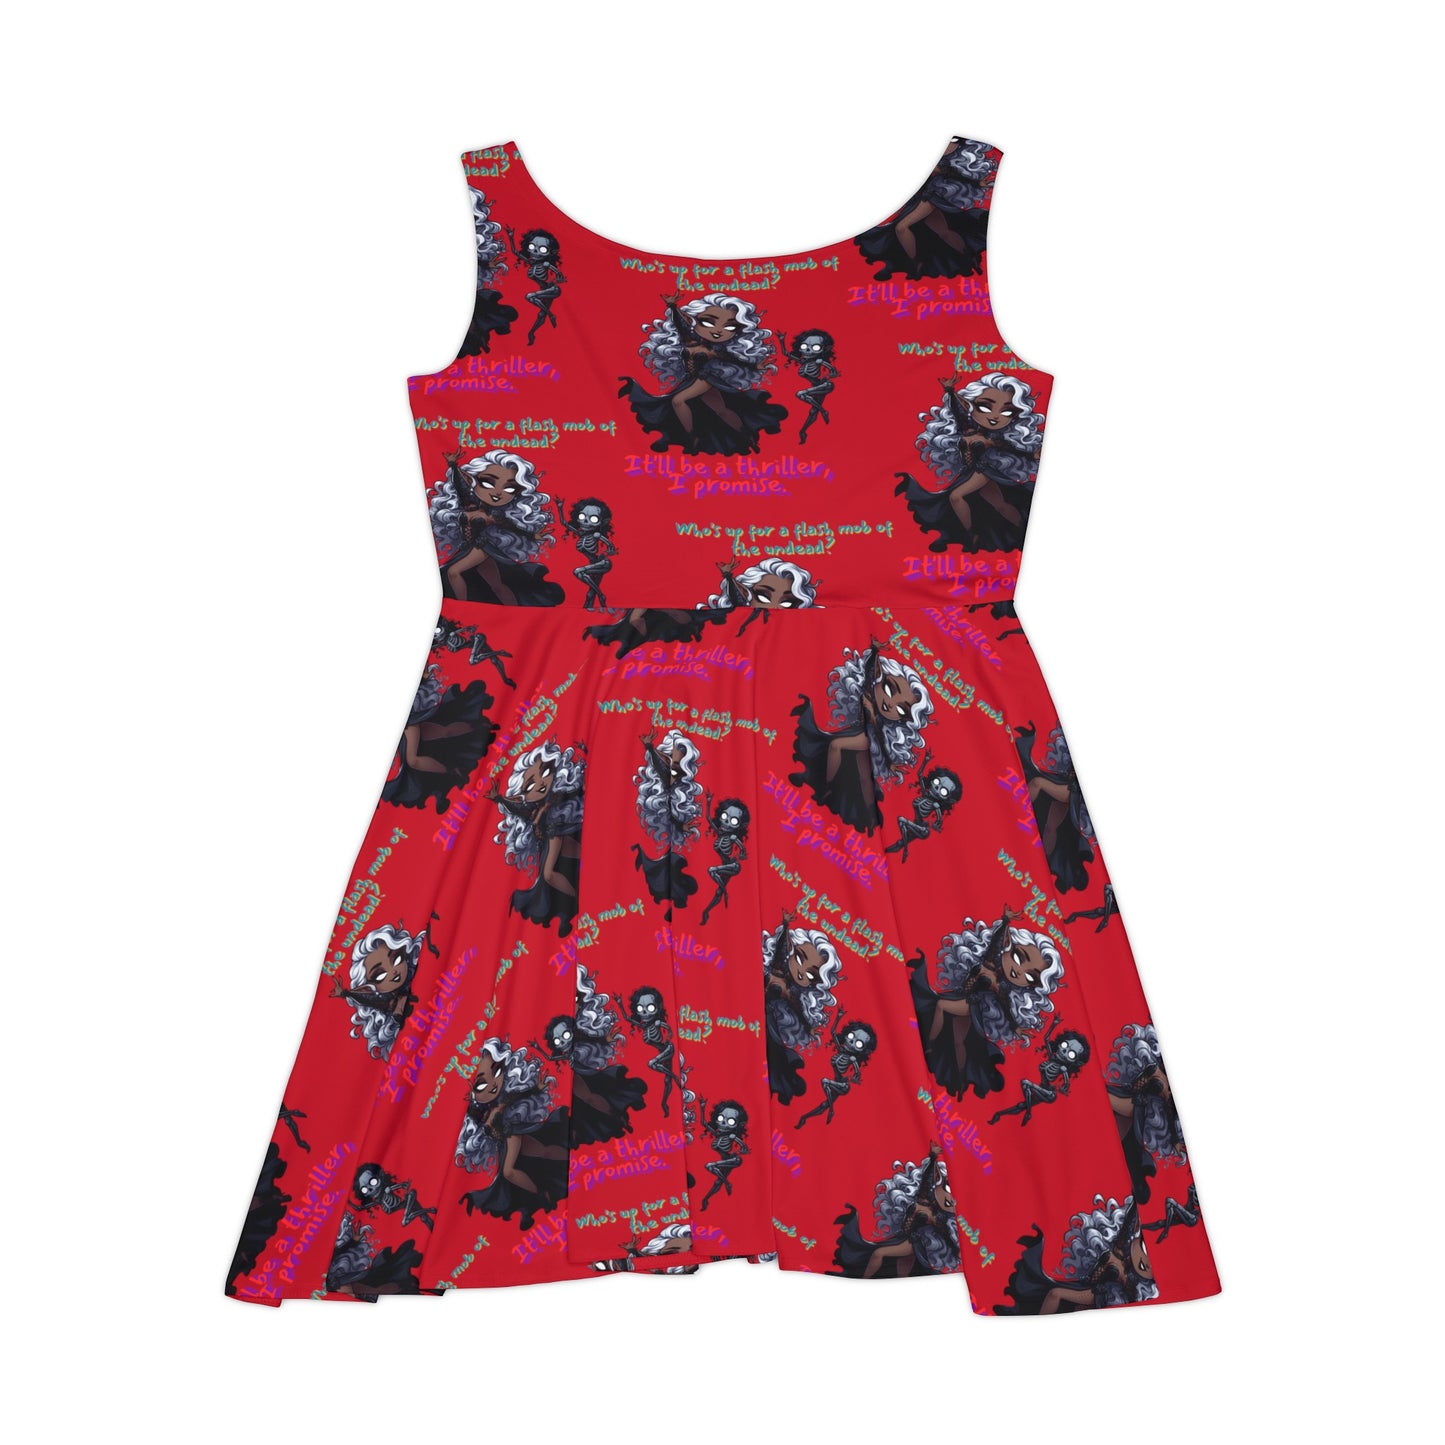 Who's Up For A Flash Mob? Women's Skater Dress